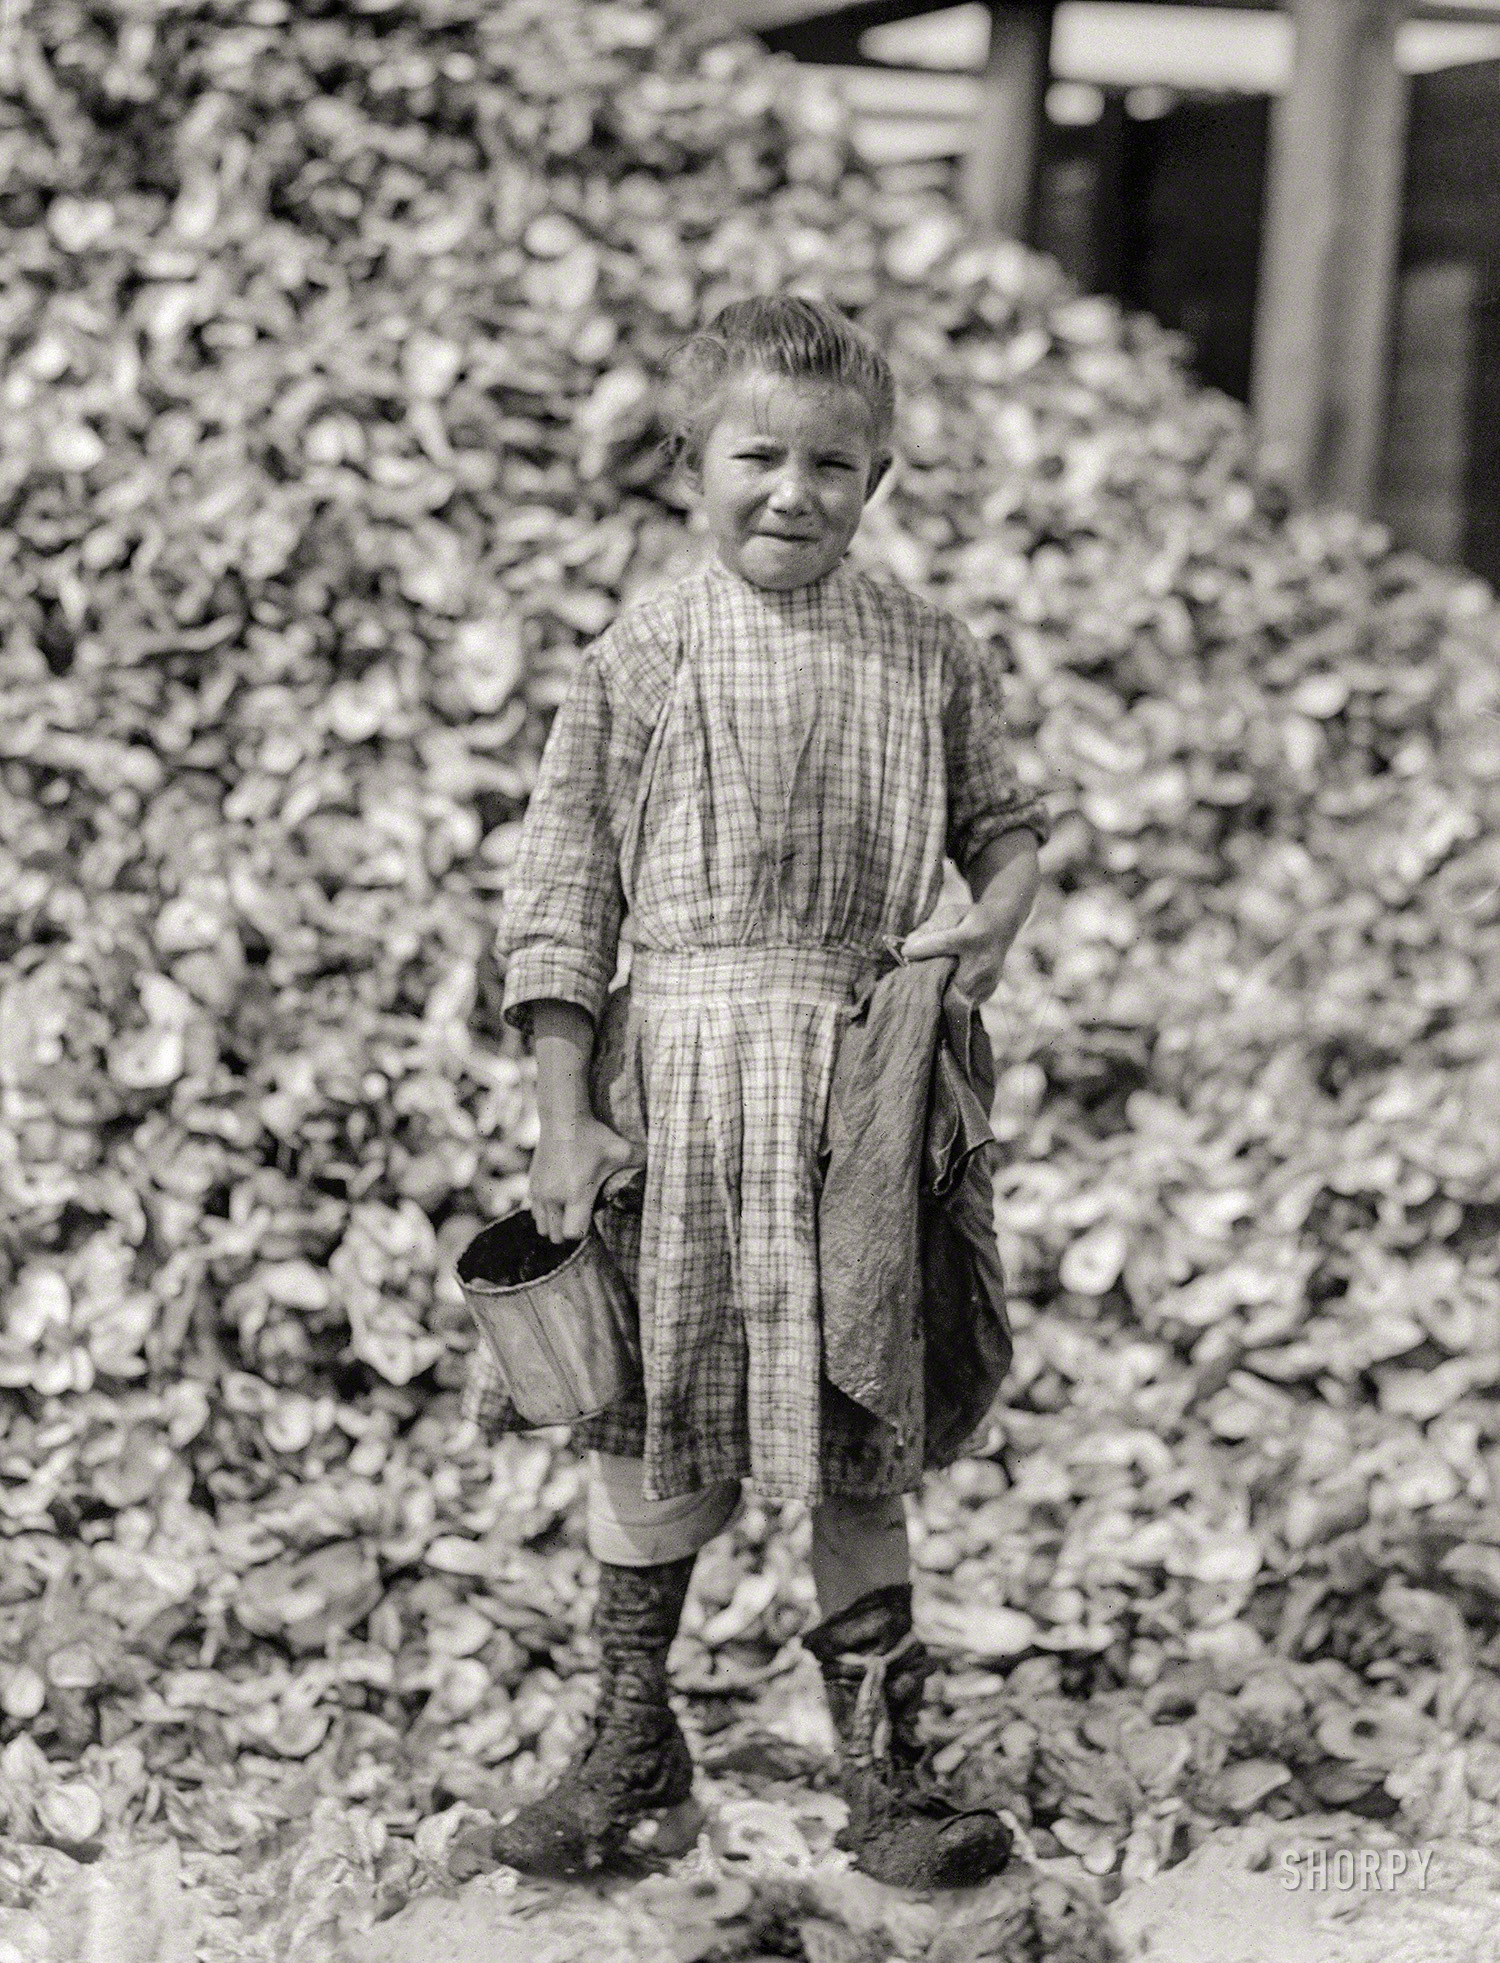 February 1912. "Tiny, a seven-year-old oyster shucker (sister of Henry, No. 3291), does not go to school. Works steady. Been at it one year. Maggioni Canning Co. Port Royal, South Carolina." Photograph by Lewis Wickes Hine. View full size.